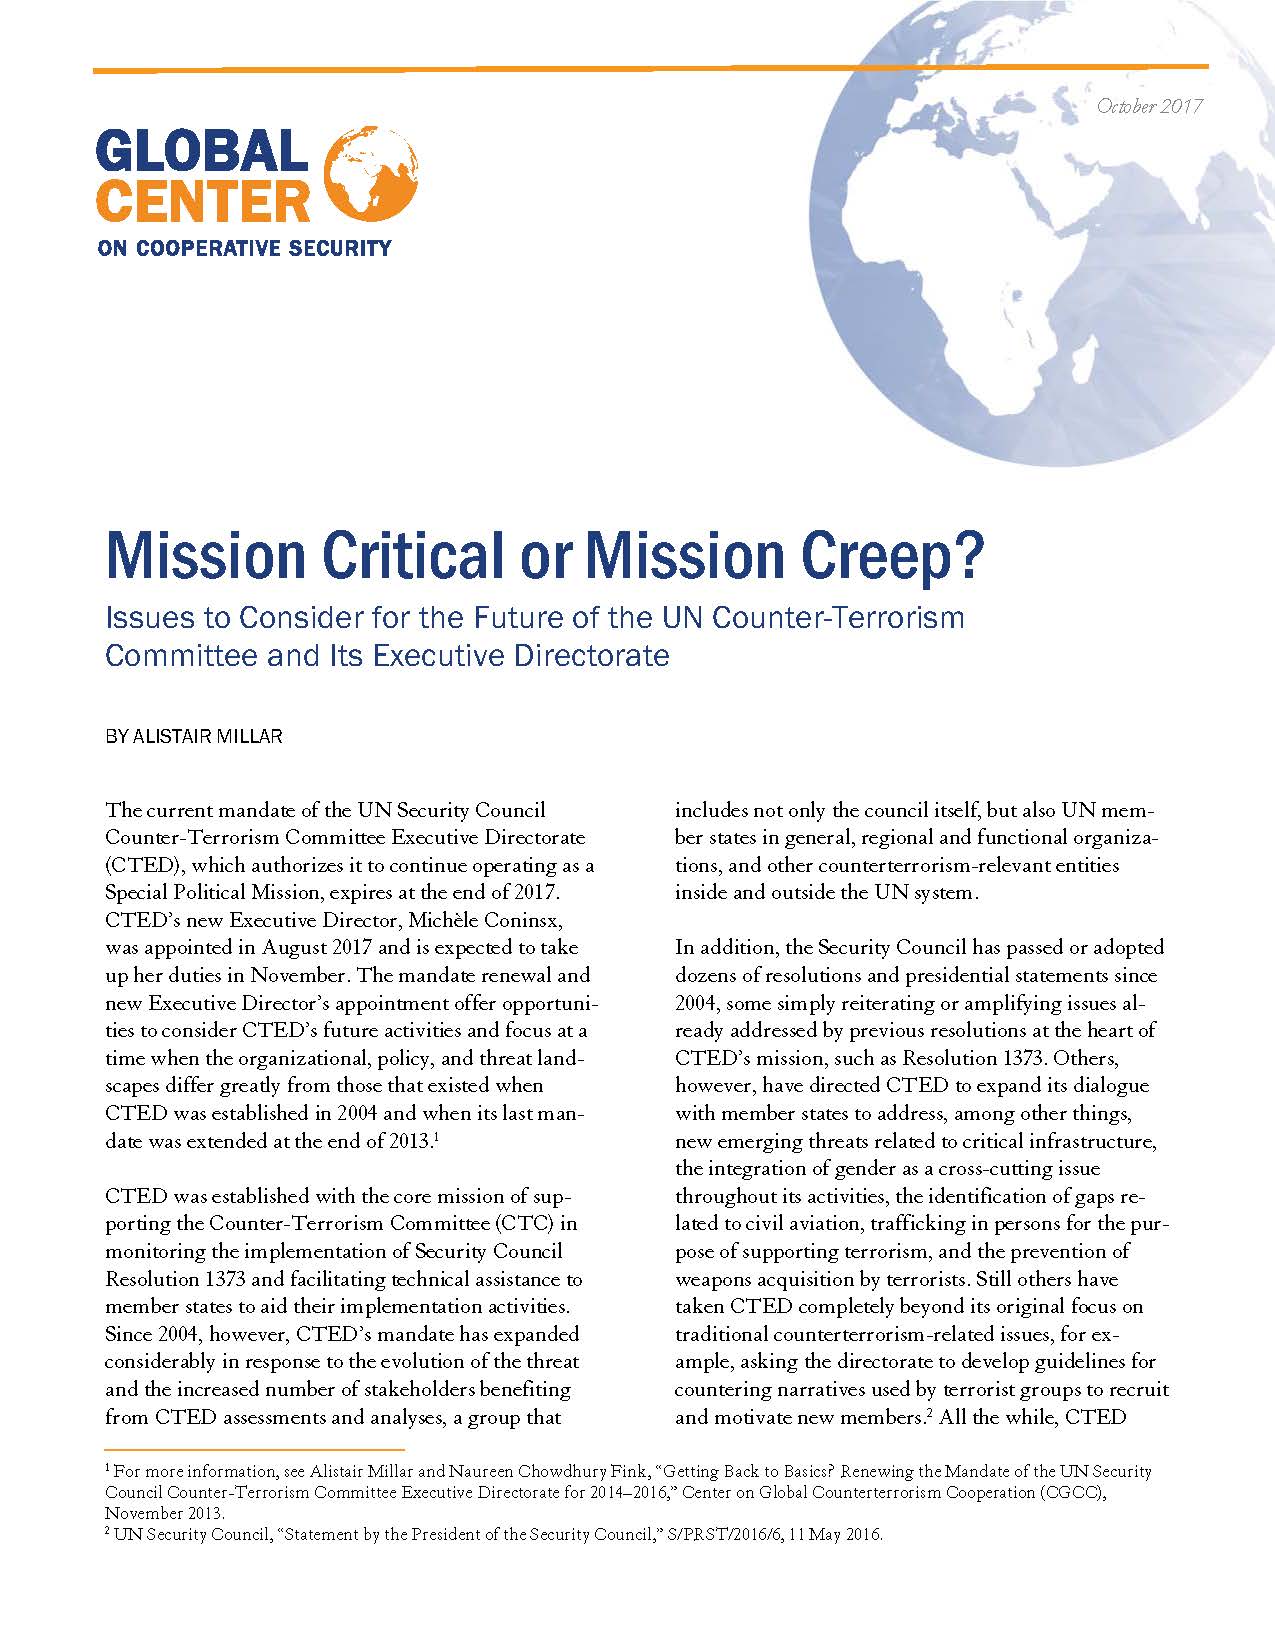 Mission Critical or Mission Creep? Issues to Consider for the Future of the UN Counter-Terrorism Committee and Its Executive Directorate